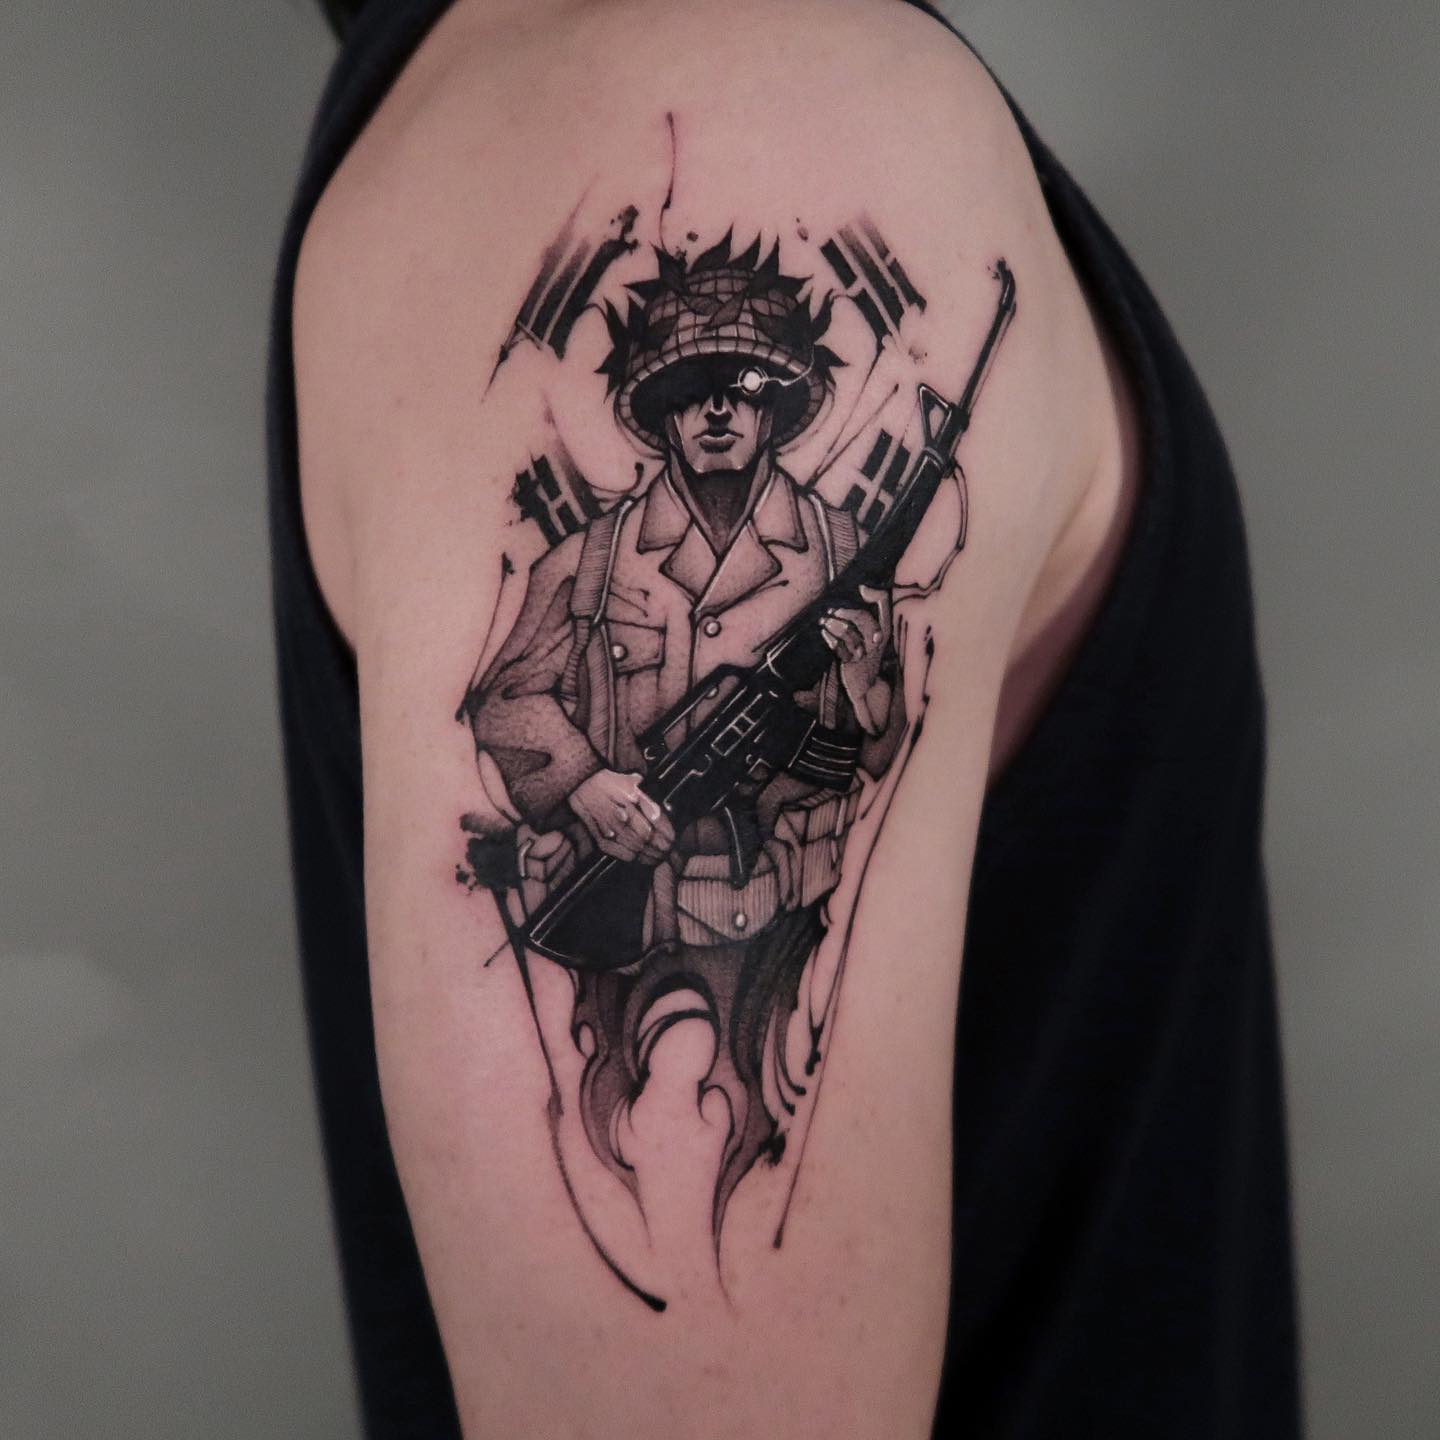 Soldier tattoo on arm by 1.0